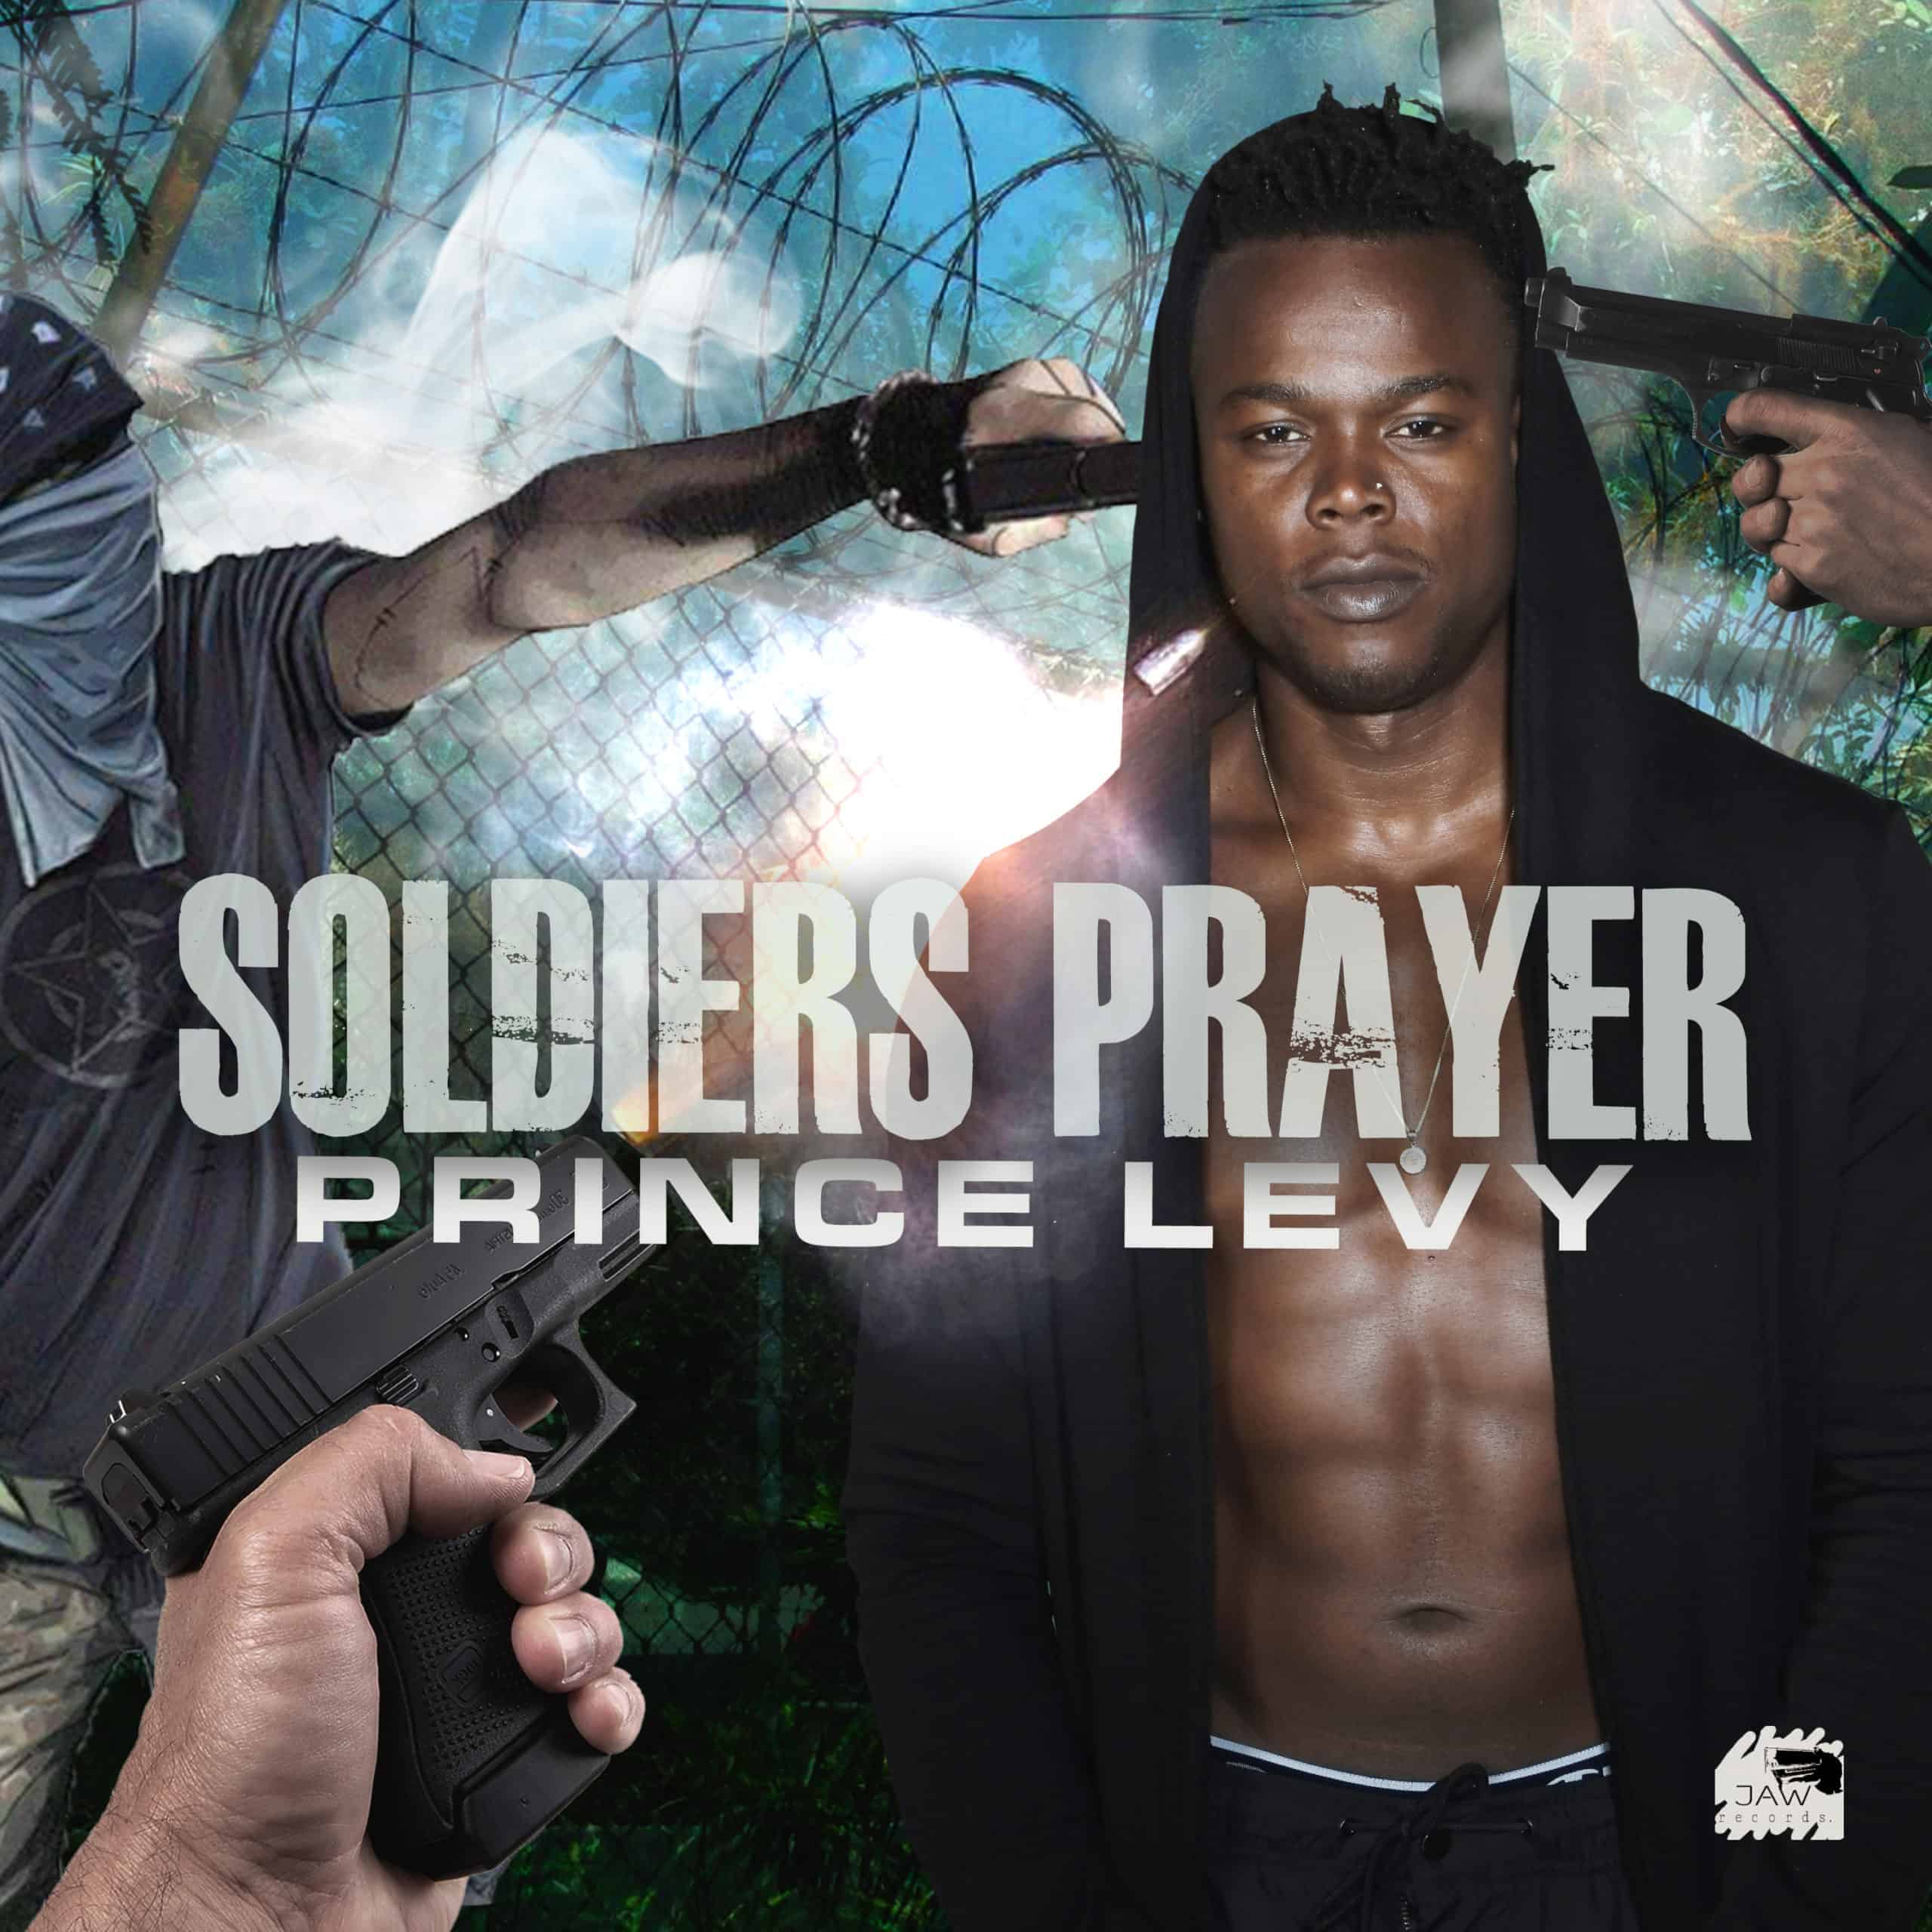 Prince Levy Entertainment and JAW Records presents - Soldiers Prayer